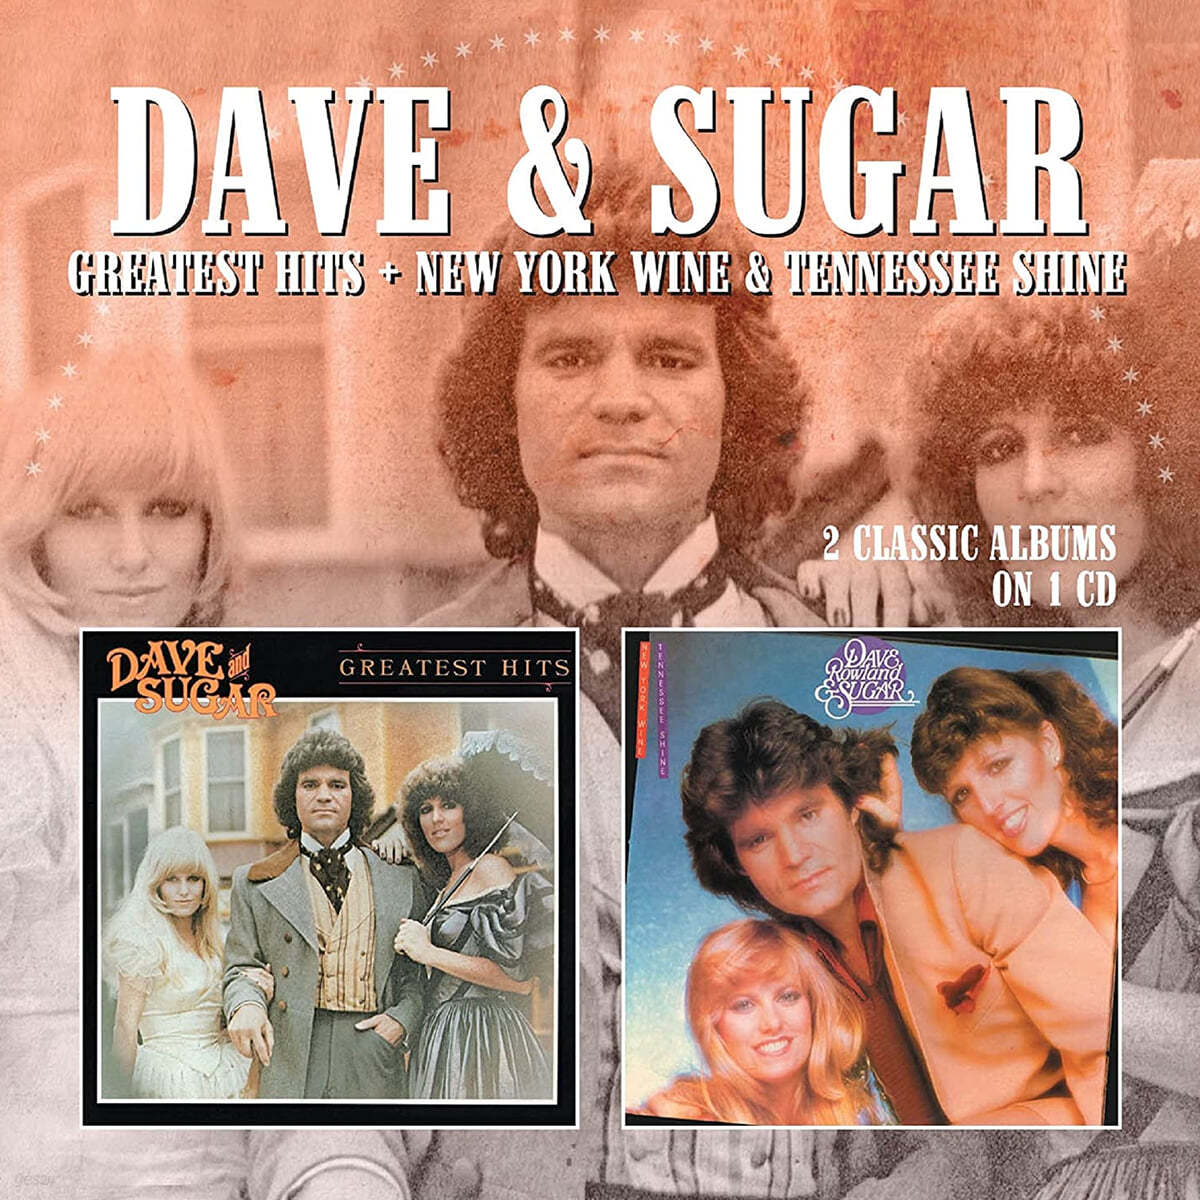 Dave & Sugar (데이브 앤 슈가) - Greatest Hits / New York Wine And Tennessee Shine 